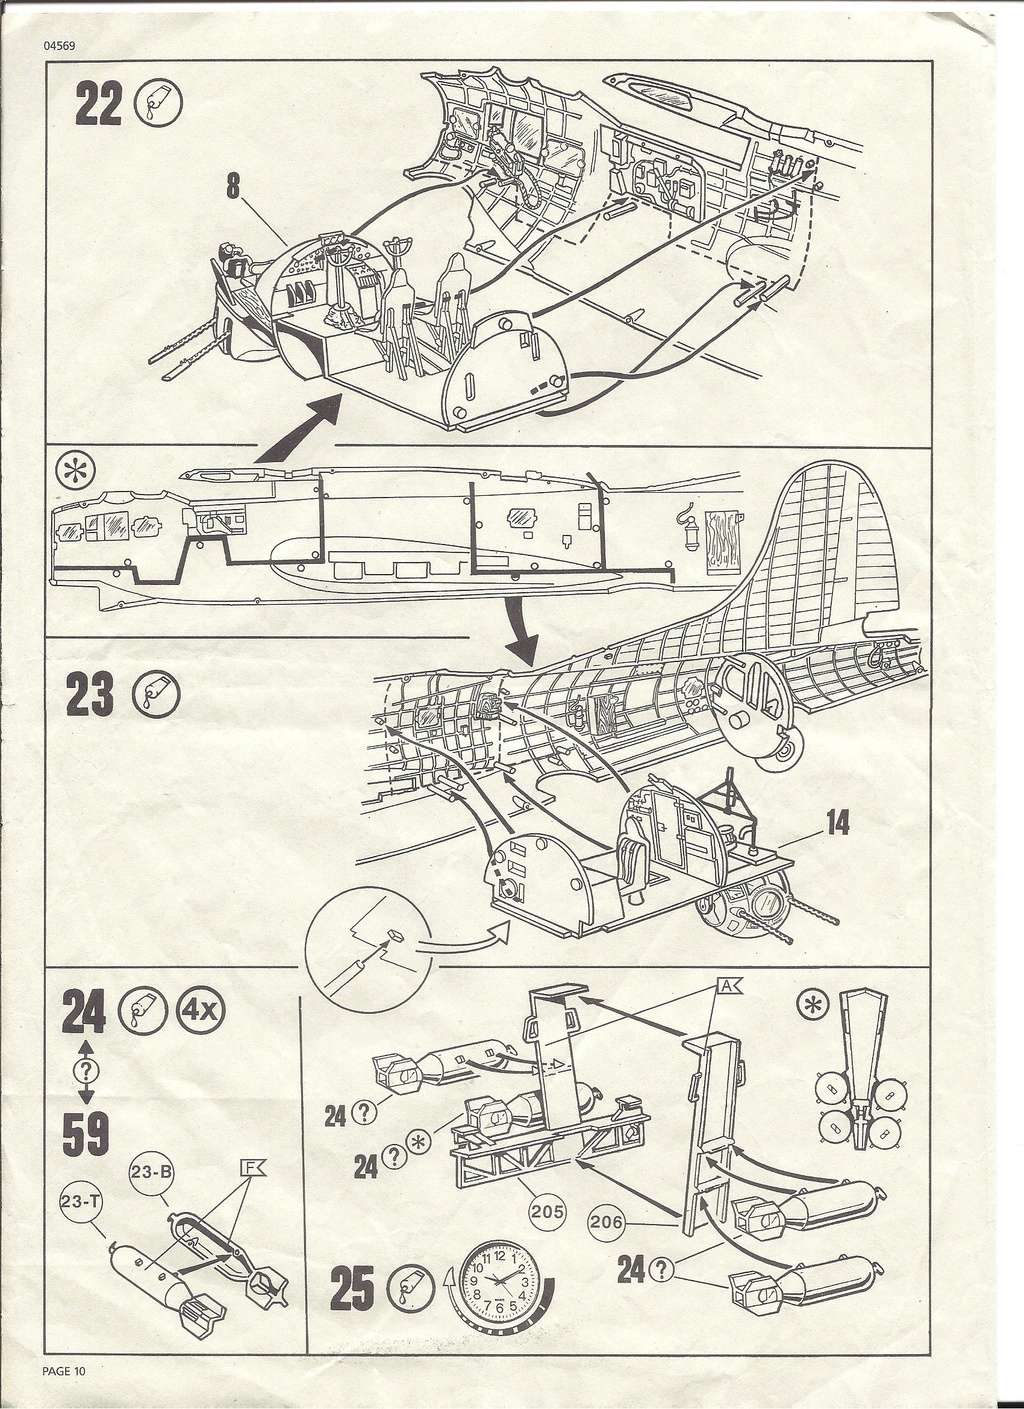 [REVELL] BOEING B 17 G FYING FORTRESS 1/48ème Réf 04569 Notice Revel129